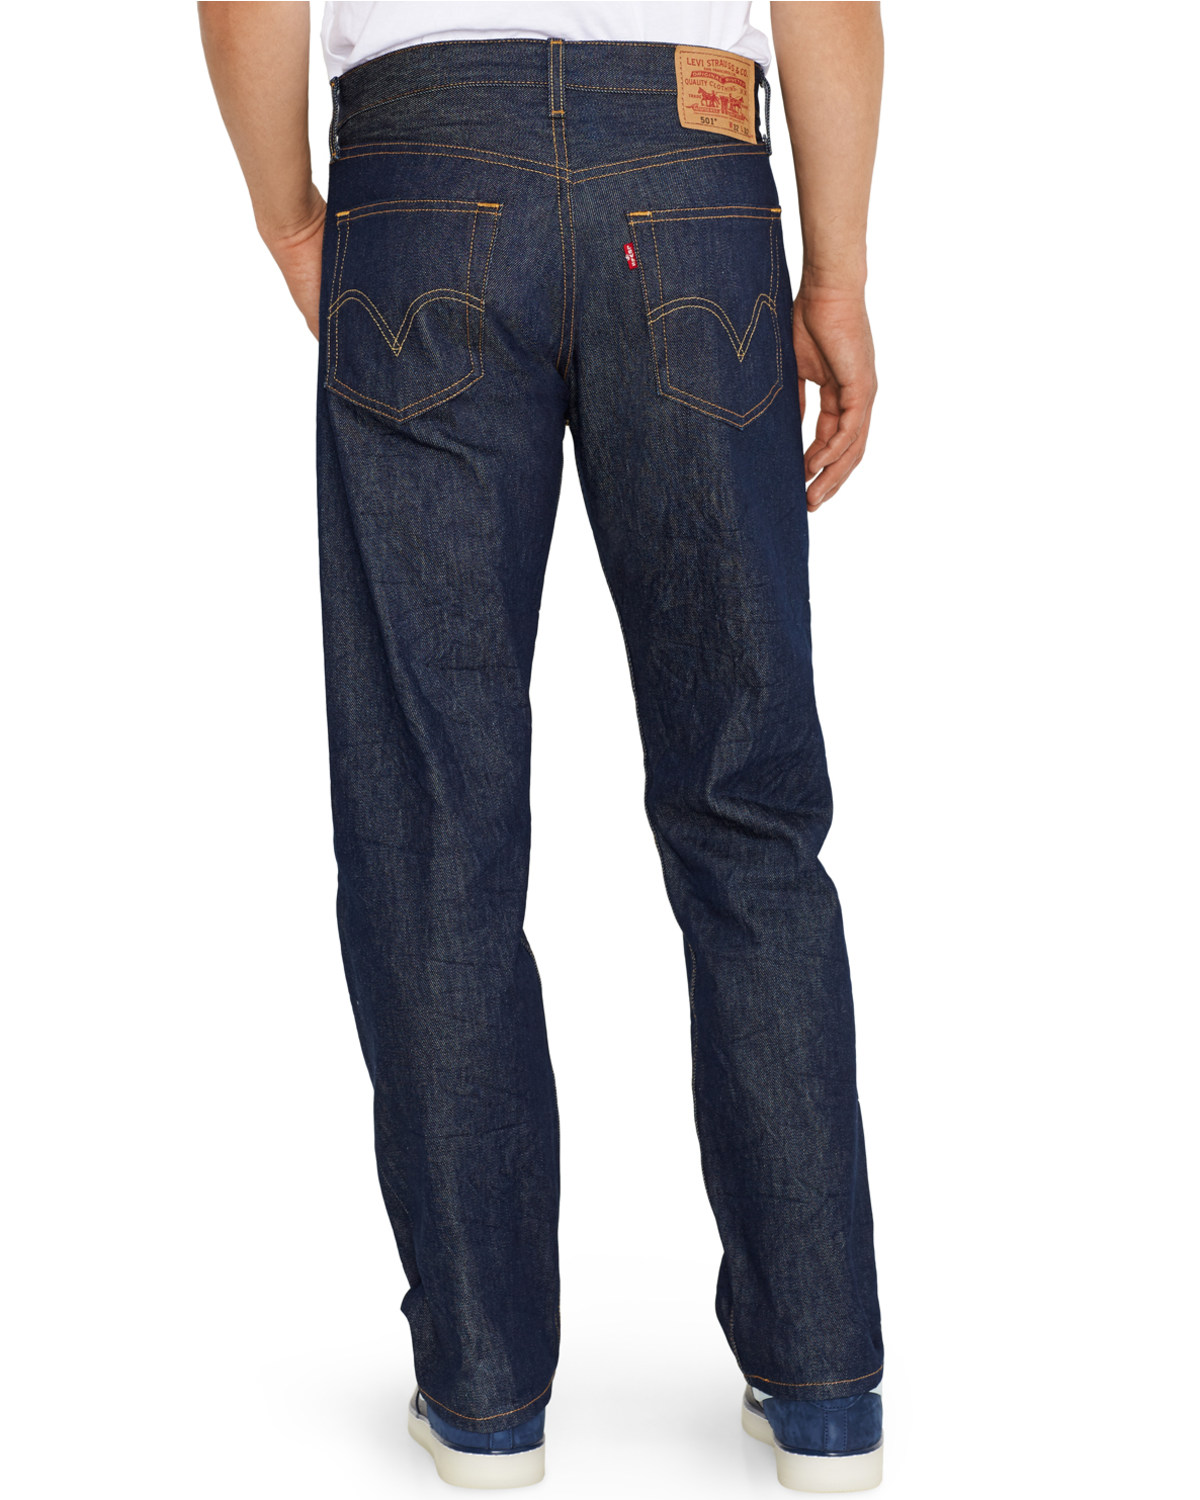 levis 501 rigid shrink to fit